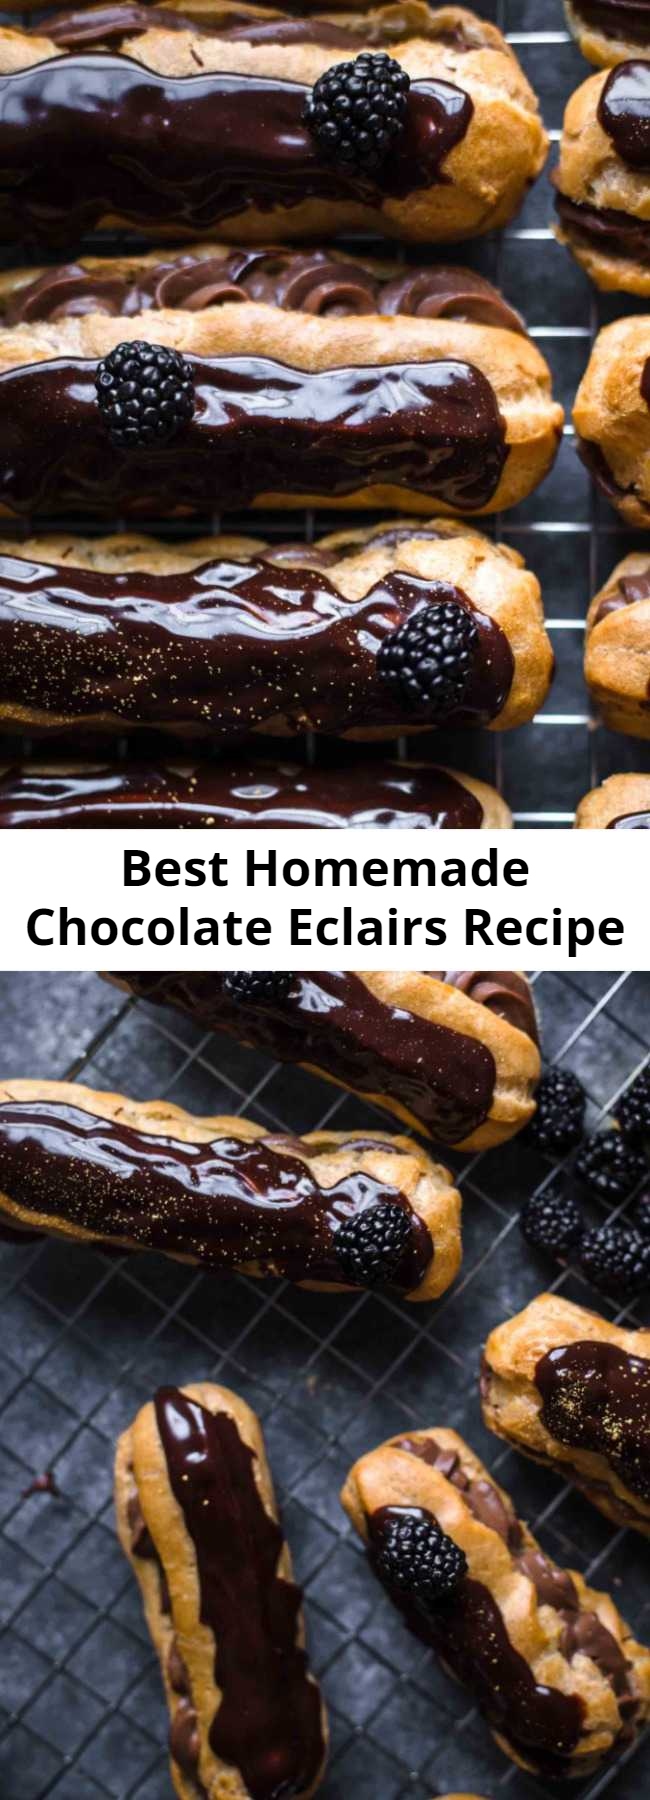 Best Homemade Chocolate Eclairs Recipe - These are the best homemade Chocolate Eclairs you will ever have. It’s an original French recipe! Light and airy Pâte à Choux filled with super creamy chocolate cream filling and topped with delicious chocolate ganache. #eclairs #chocolate #baking #sweets #desserts